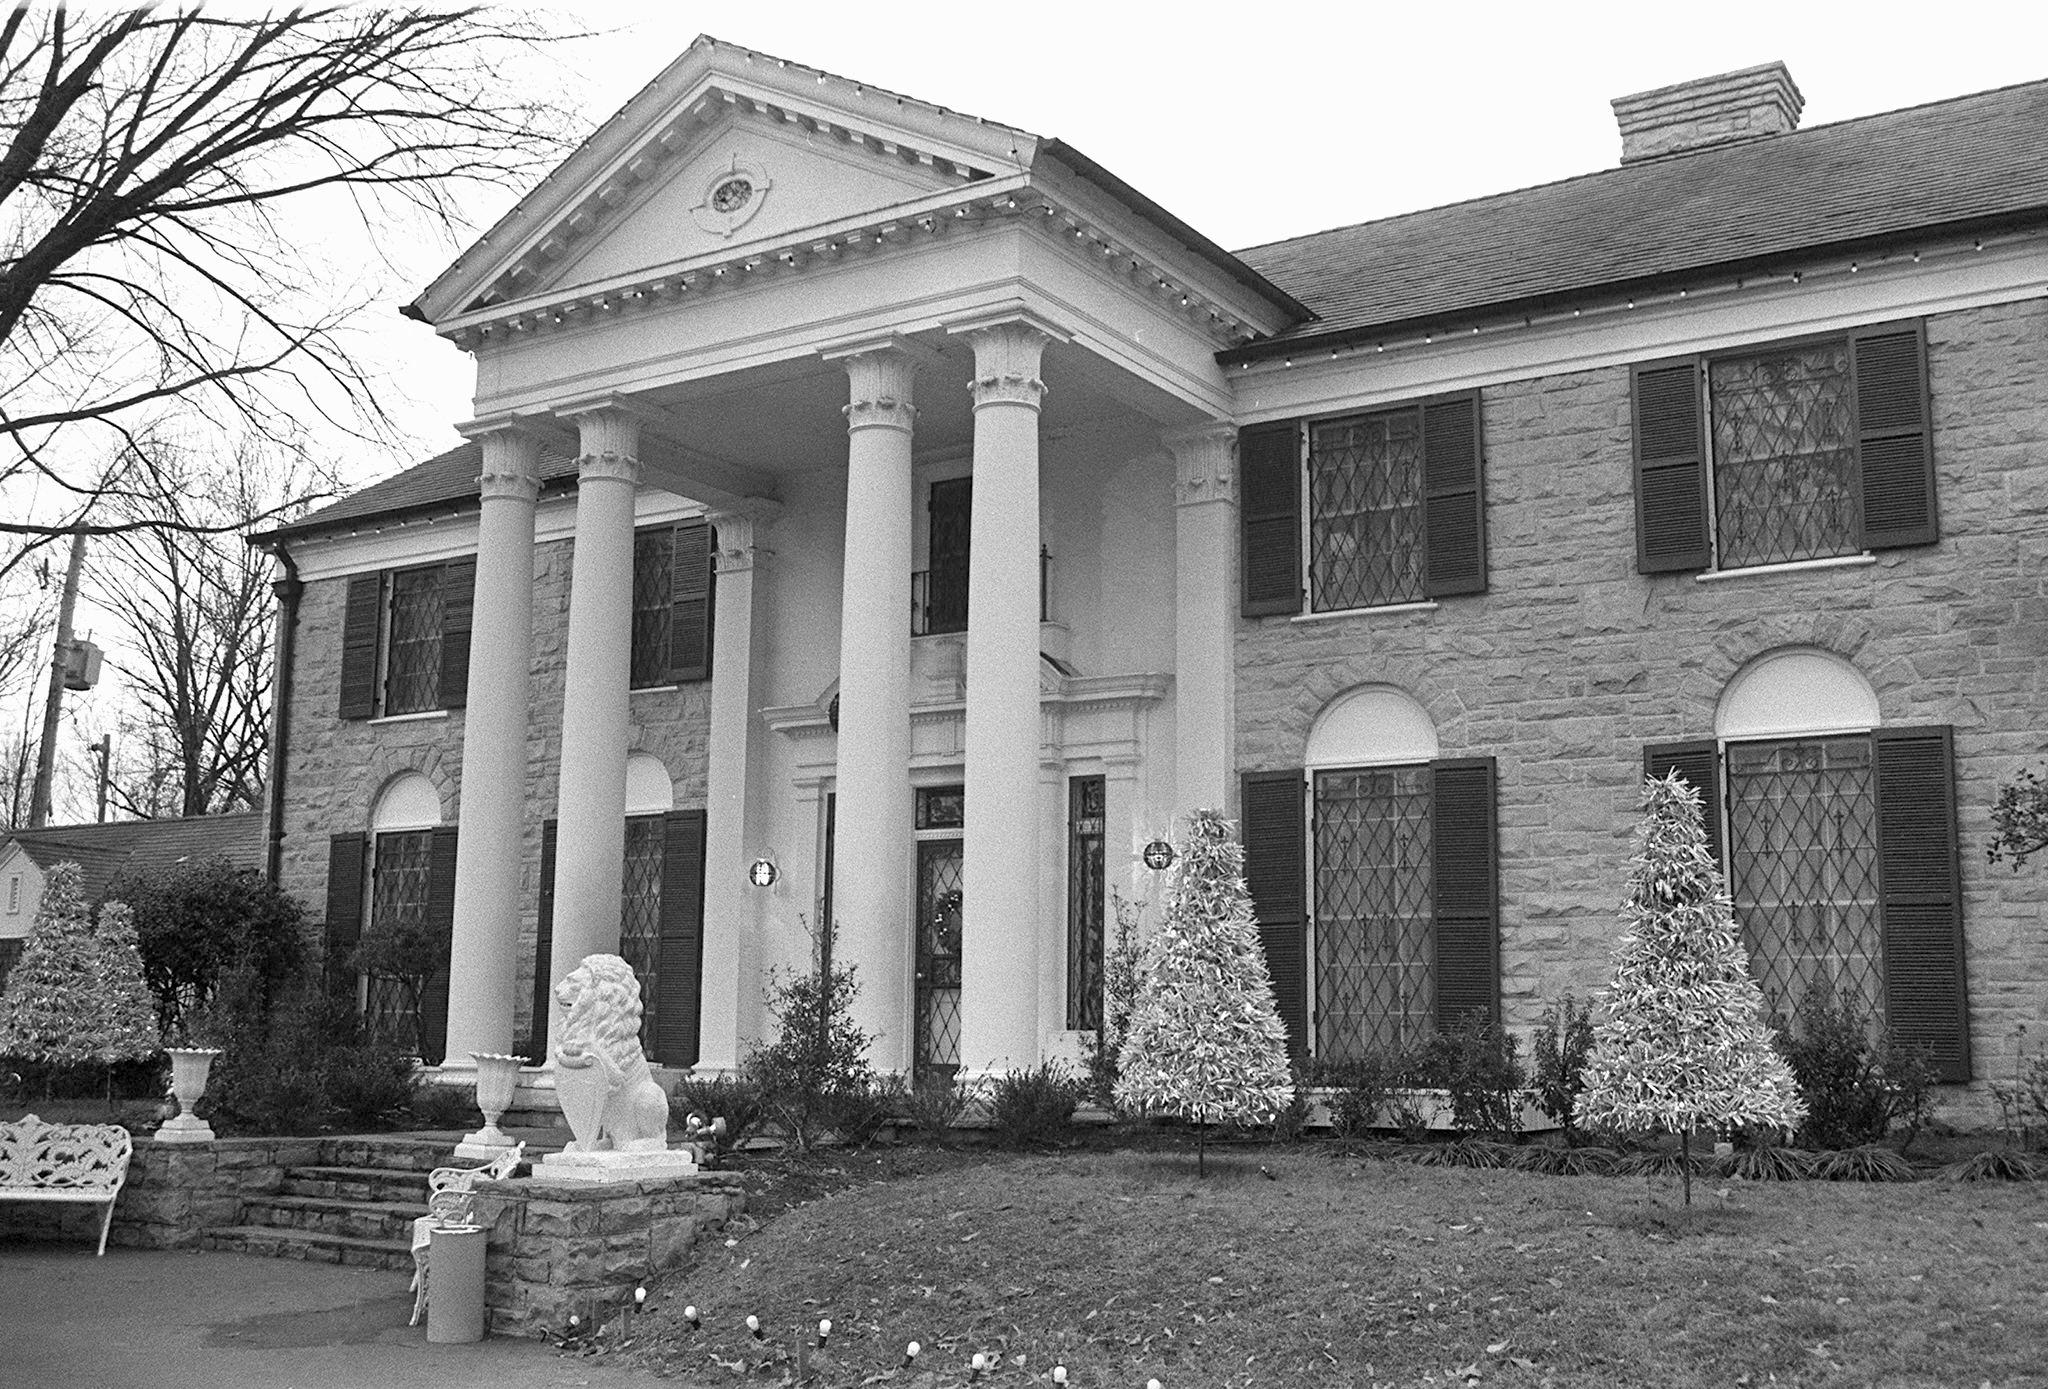 Elvis Presley's Graceland with Christmas trees in the front